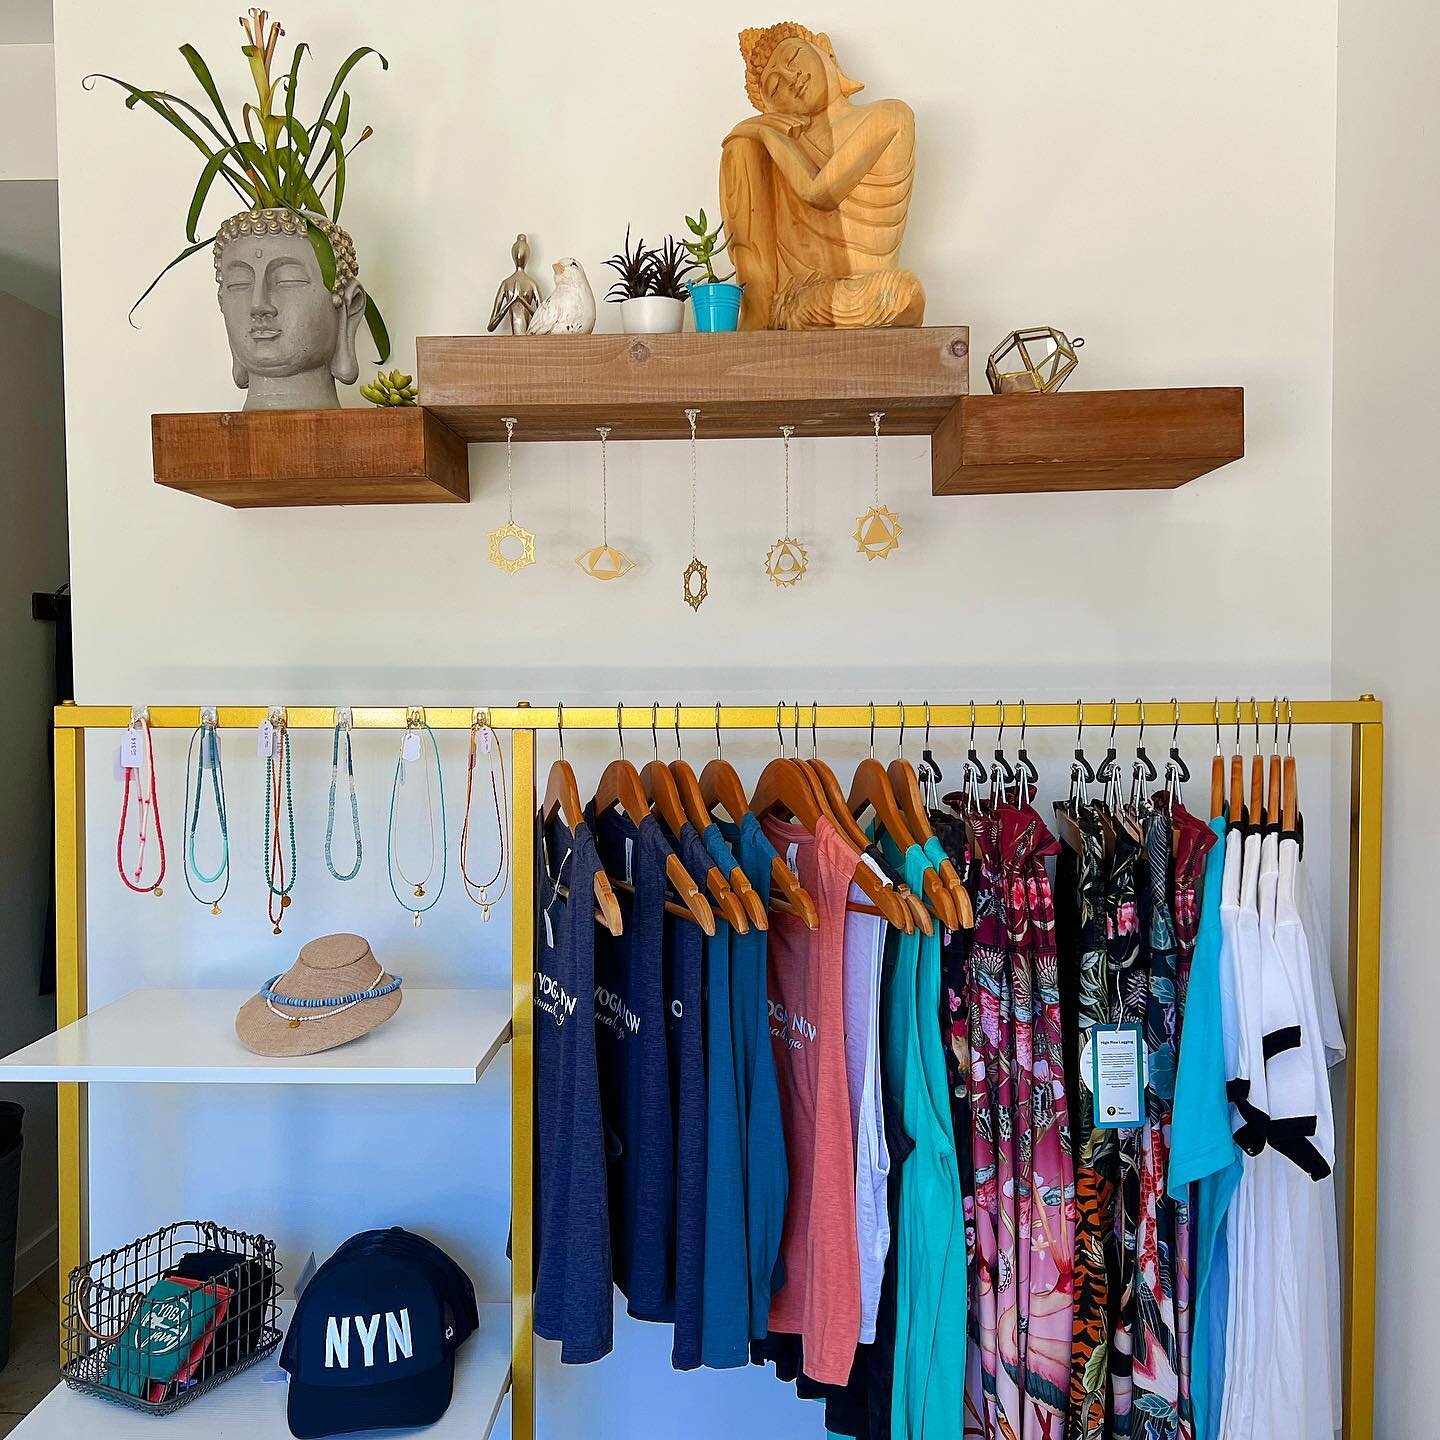 Perfect day for yoga and&hellip; shopping 😉 Check out some of our beautiful things and new merch in the shop! 
.
.
#shoplocal #shoplocalsavannah 
#newyoganow #nyncommunity #savannahyoga #yogastudio #savannahgeorgia